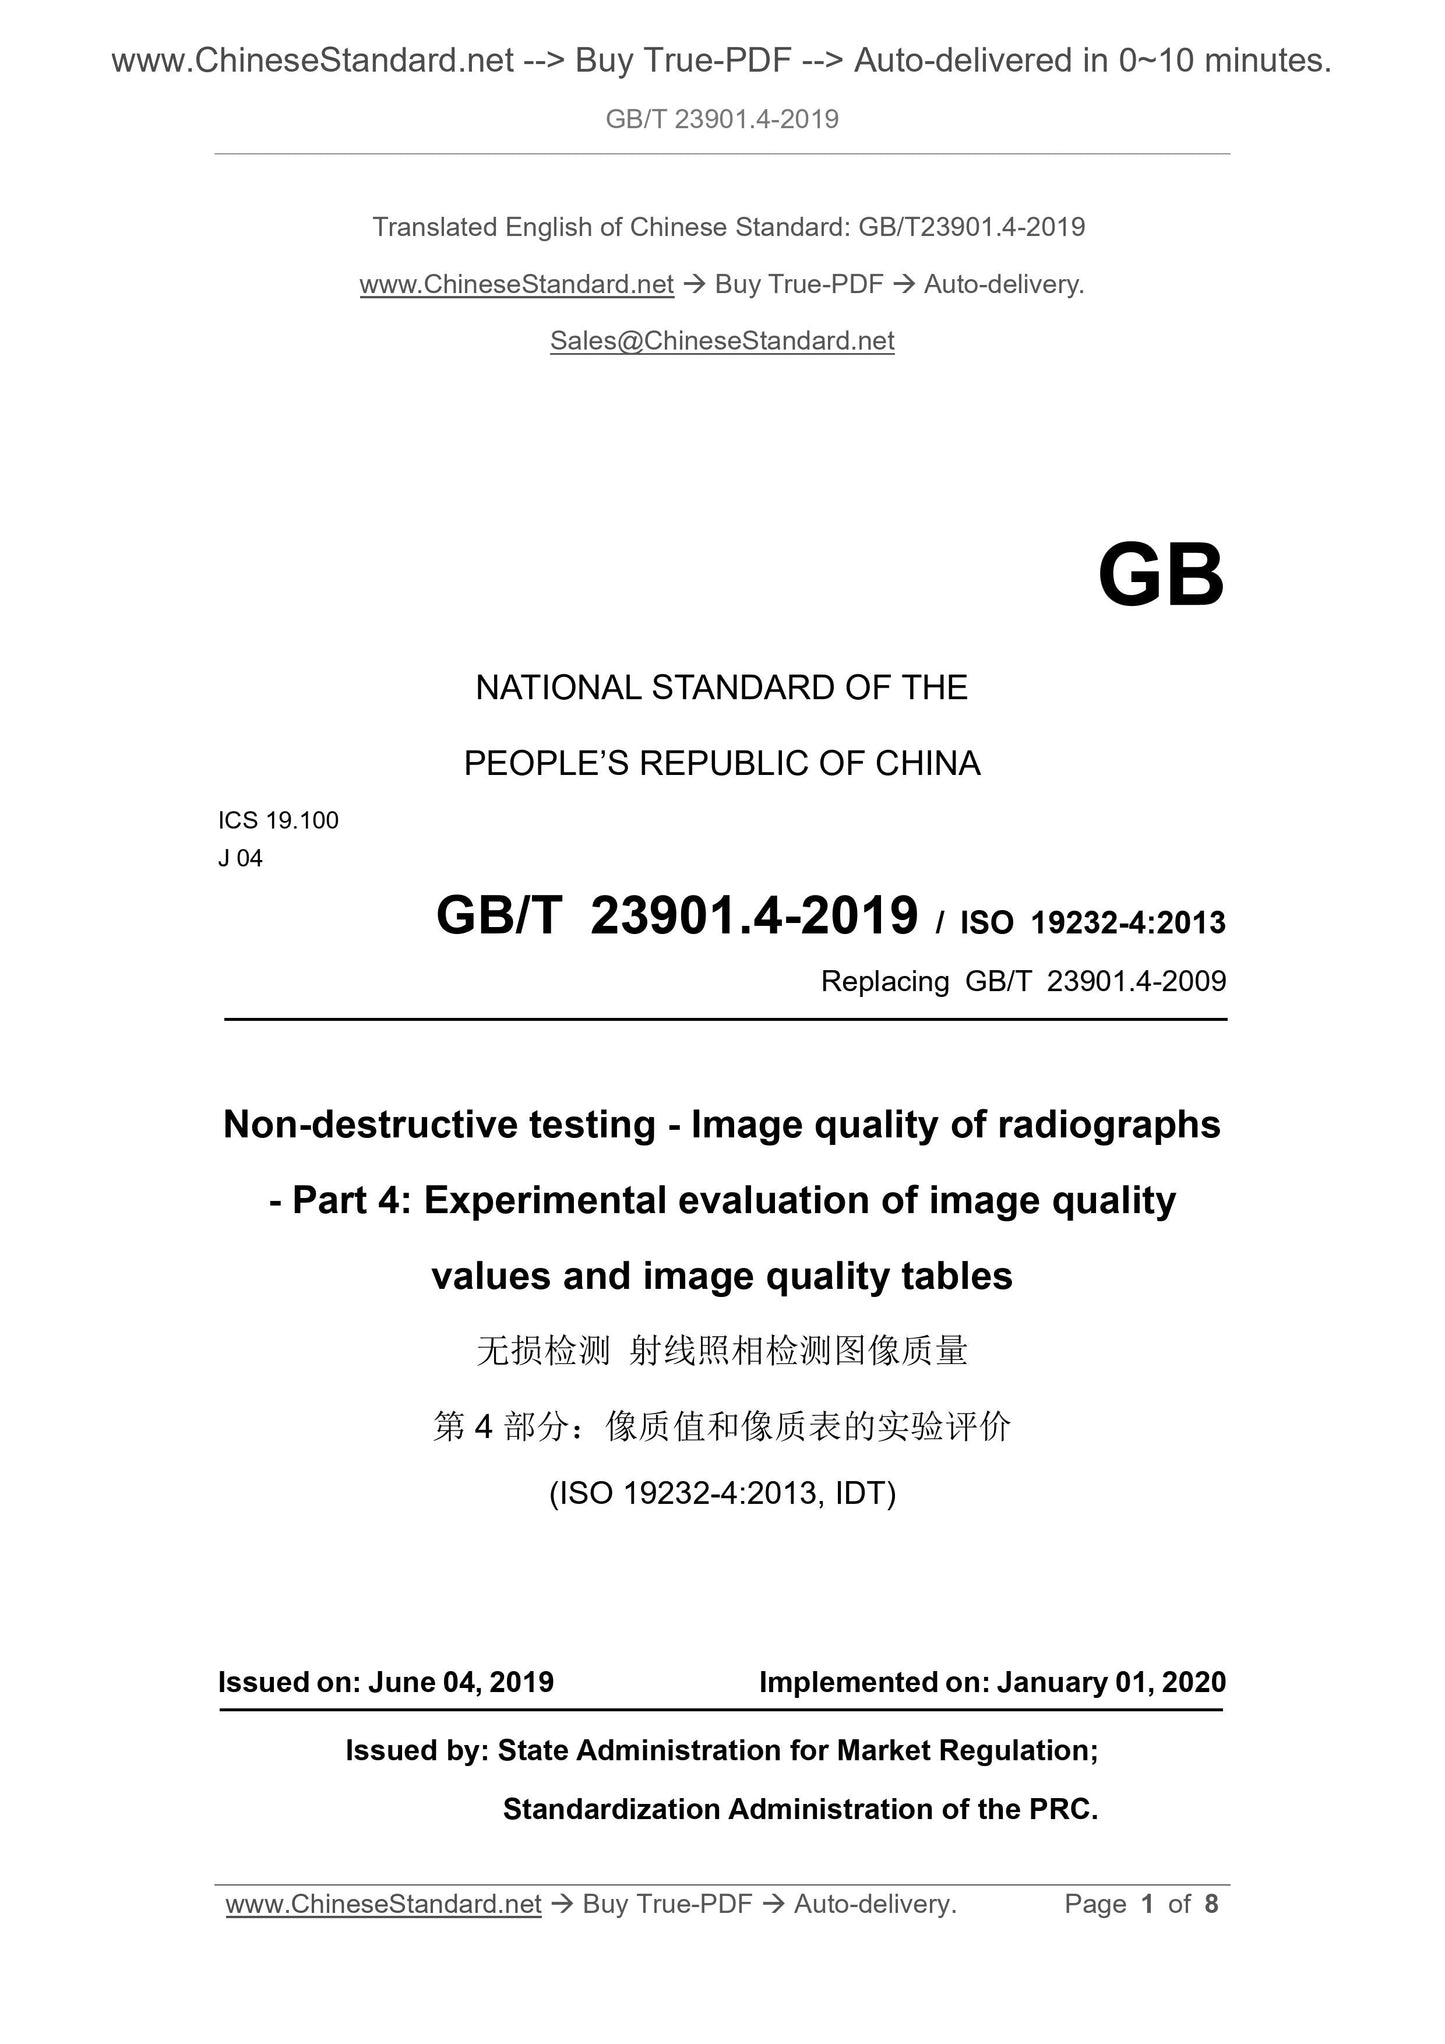 GB/T 23901.4-2019 Page 1